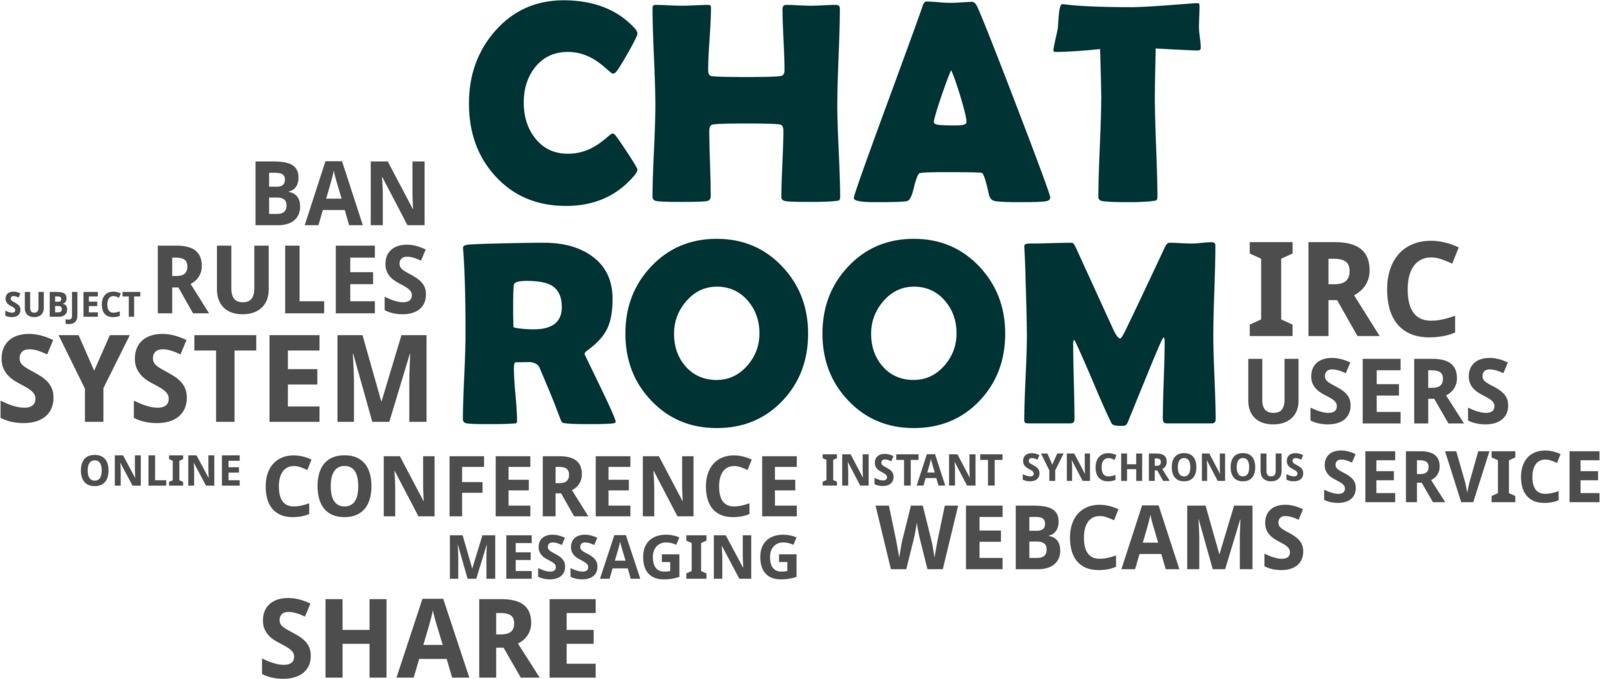 word cloud - chat room by master_art